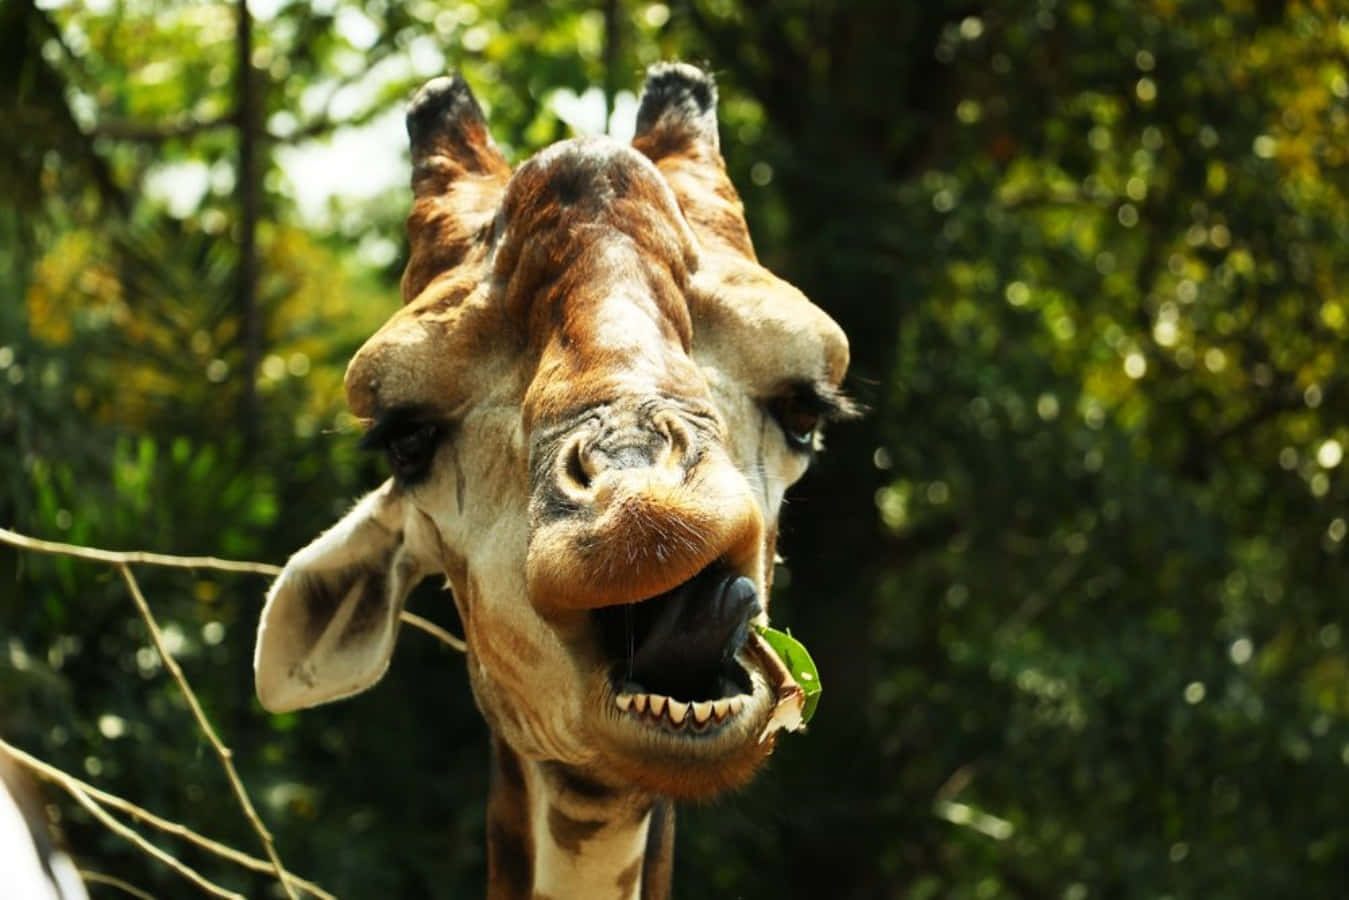 Funny Animal Giraffe Funny Face Open Mouth Pictures